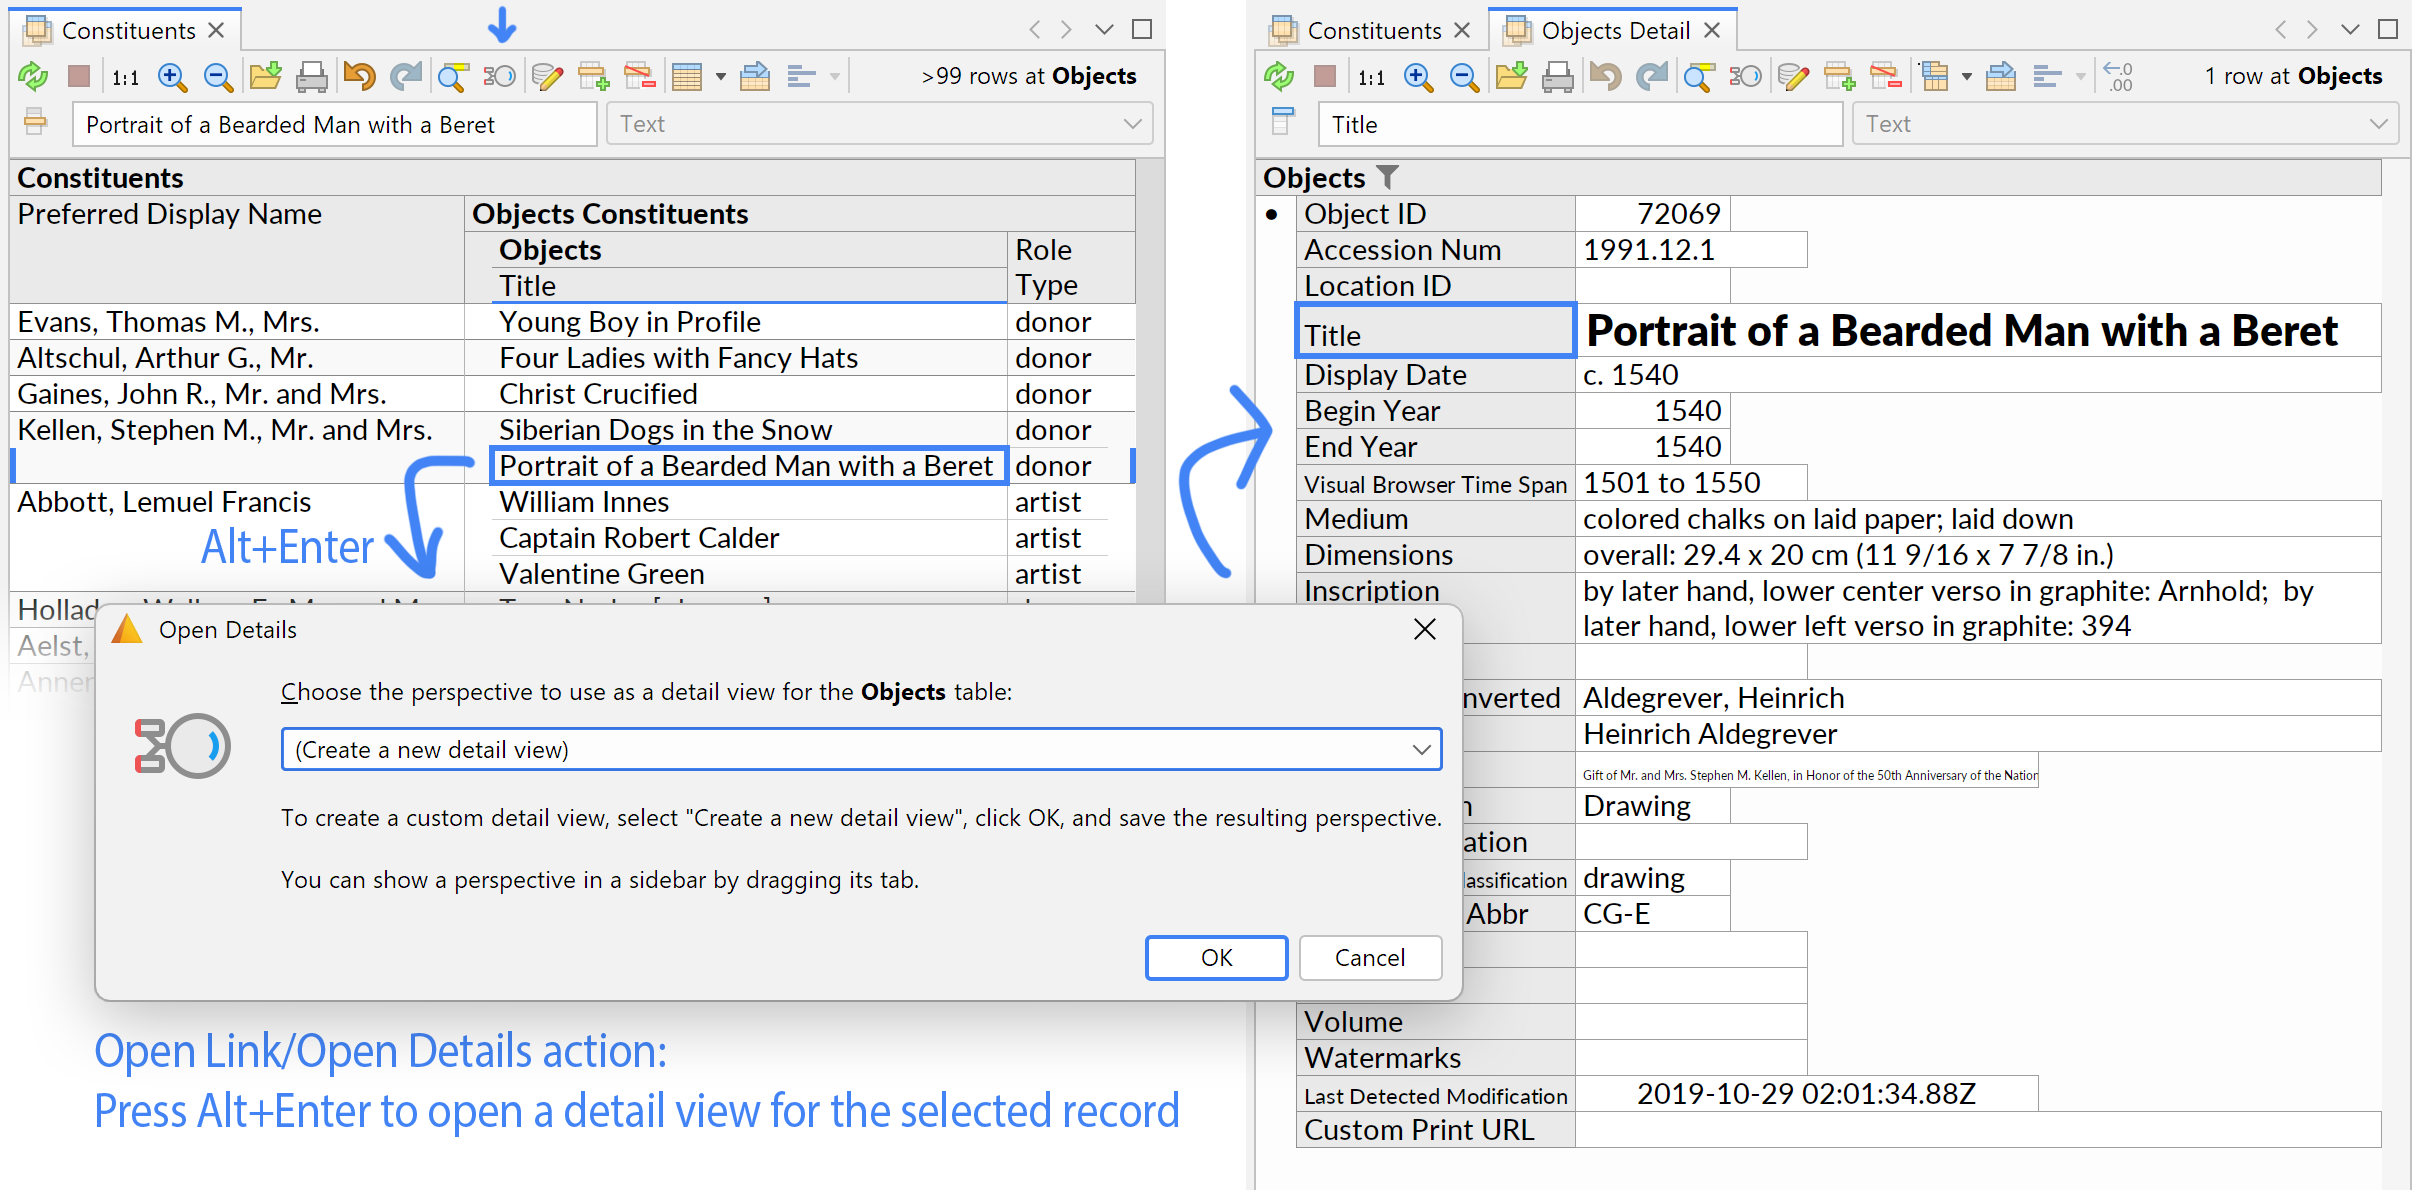 Using the Open Details action to open a detail view corresponding to a selected row in the database.